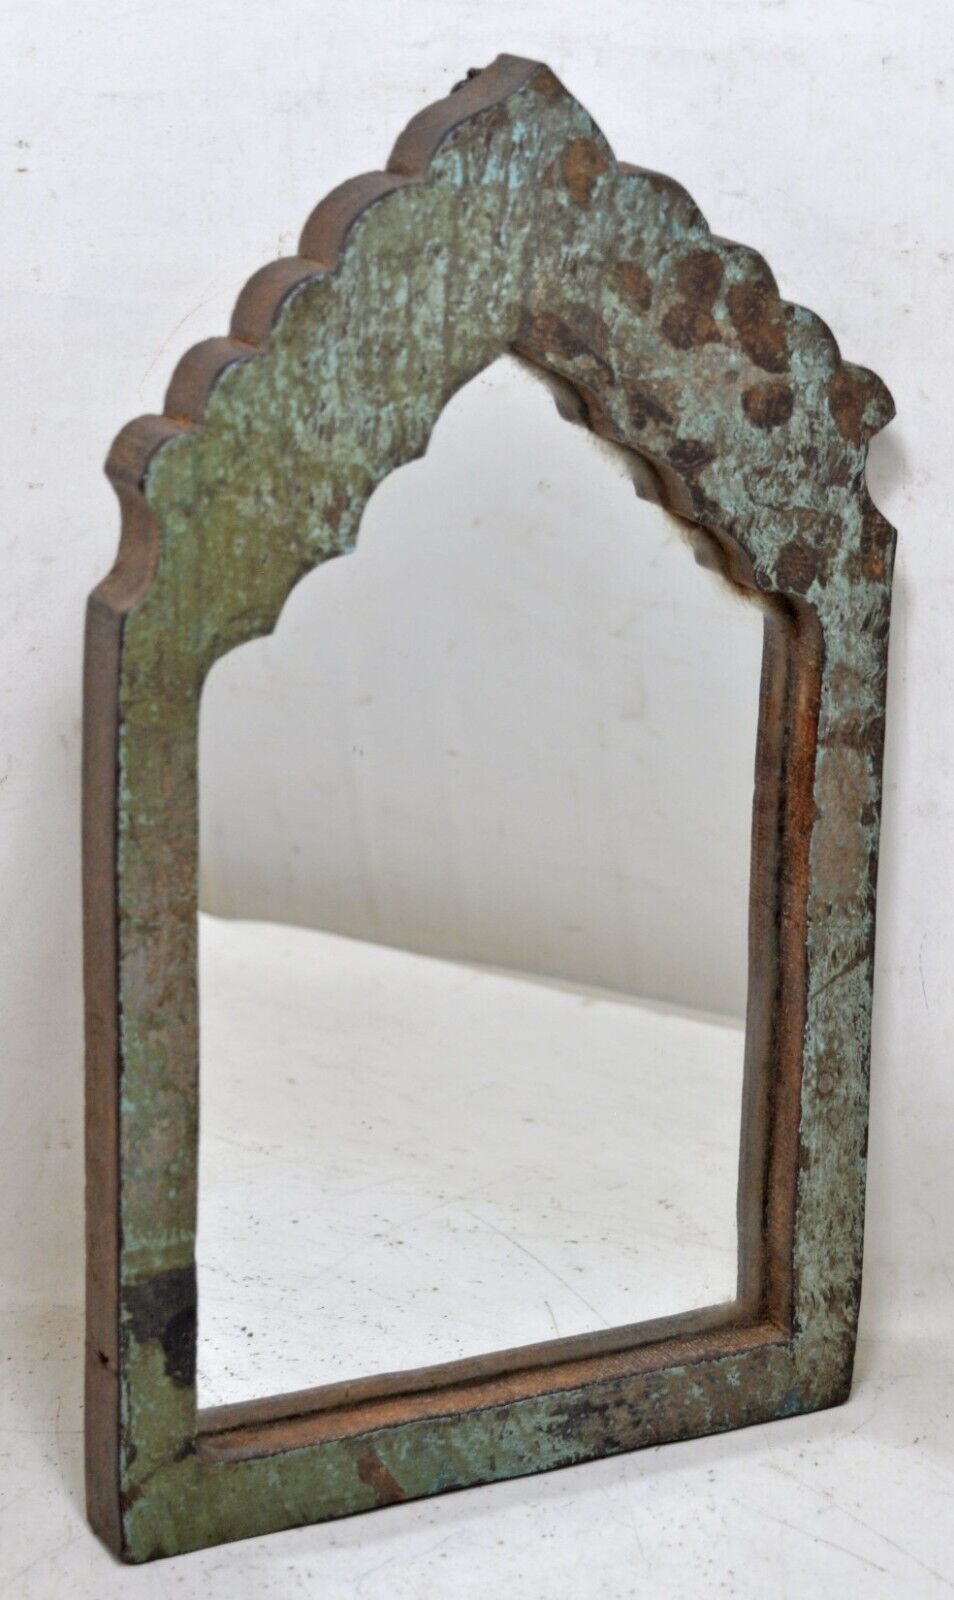 Salvage Reclaimed Wood Wall Décor Arch Shaped Mirror Frame Rustic Polychrome